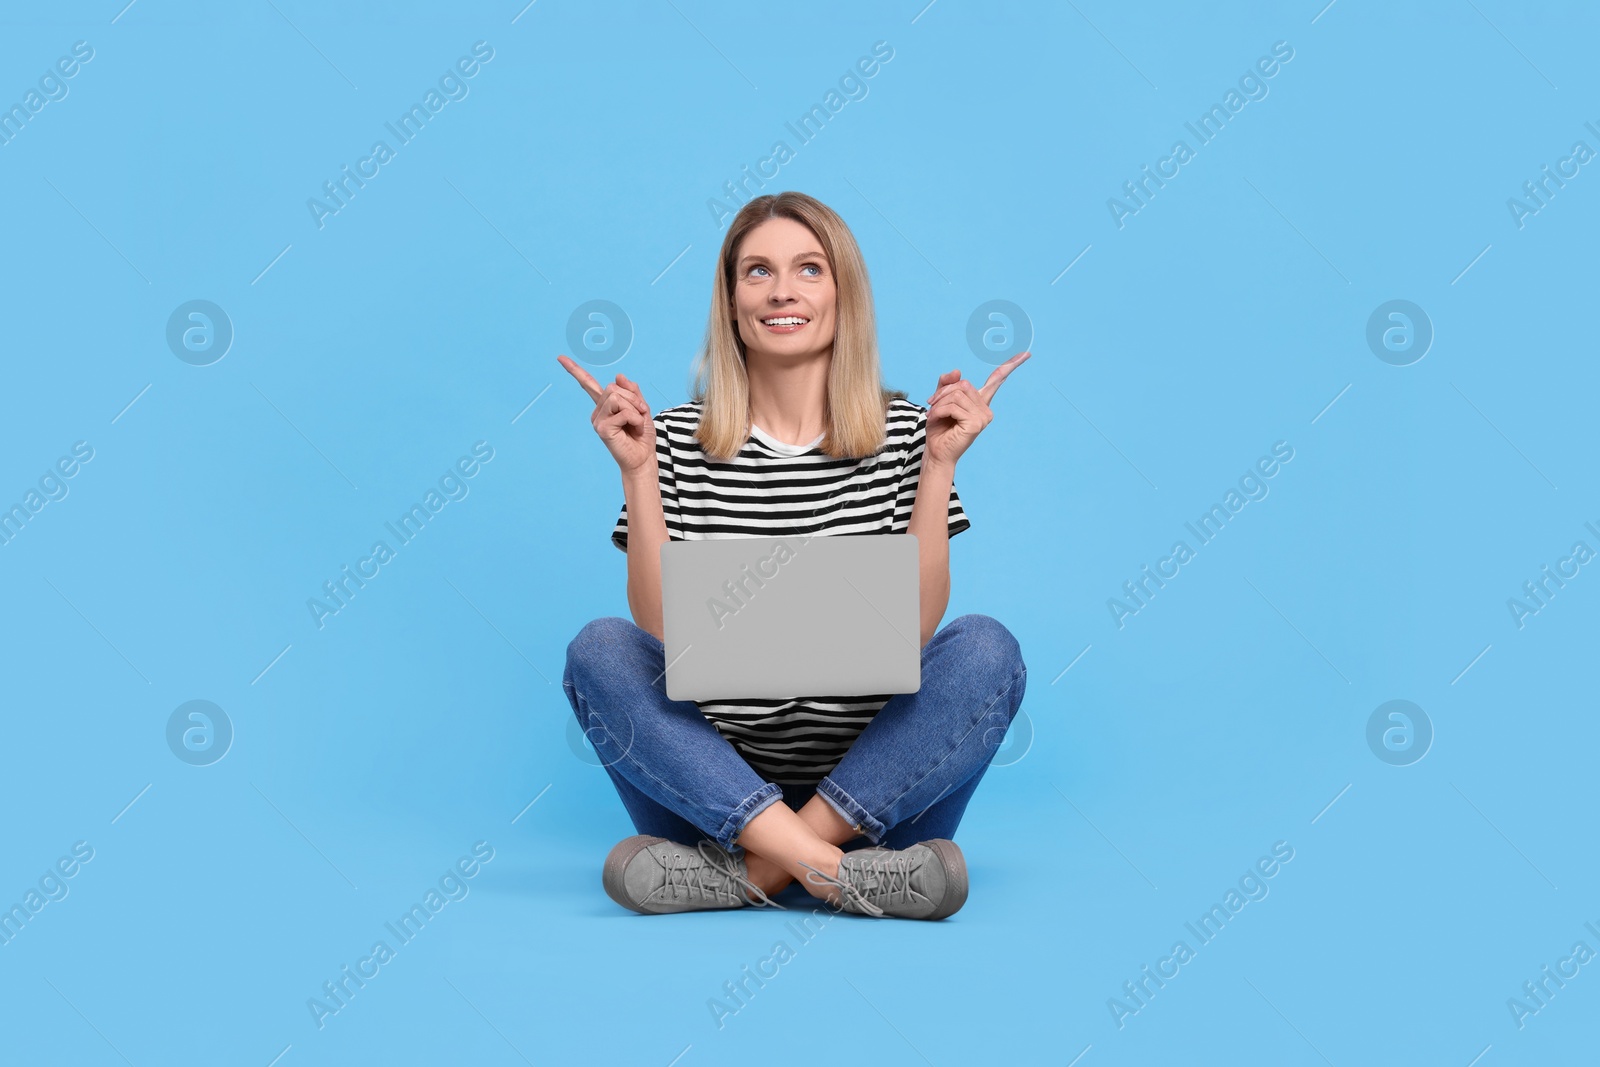 Photo of Happy woman with laptop pointing at something on light blue background